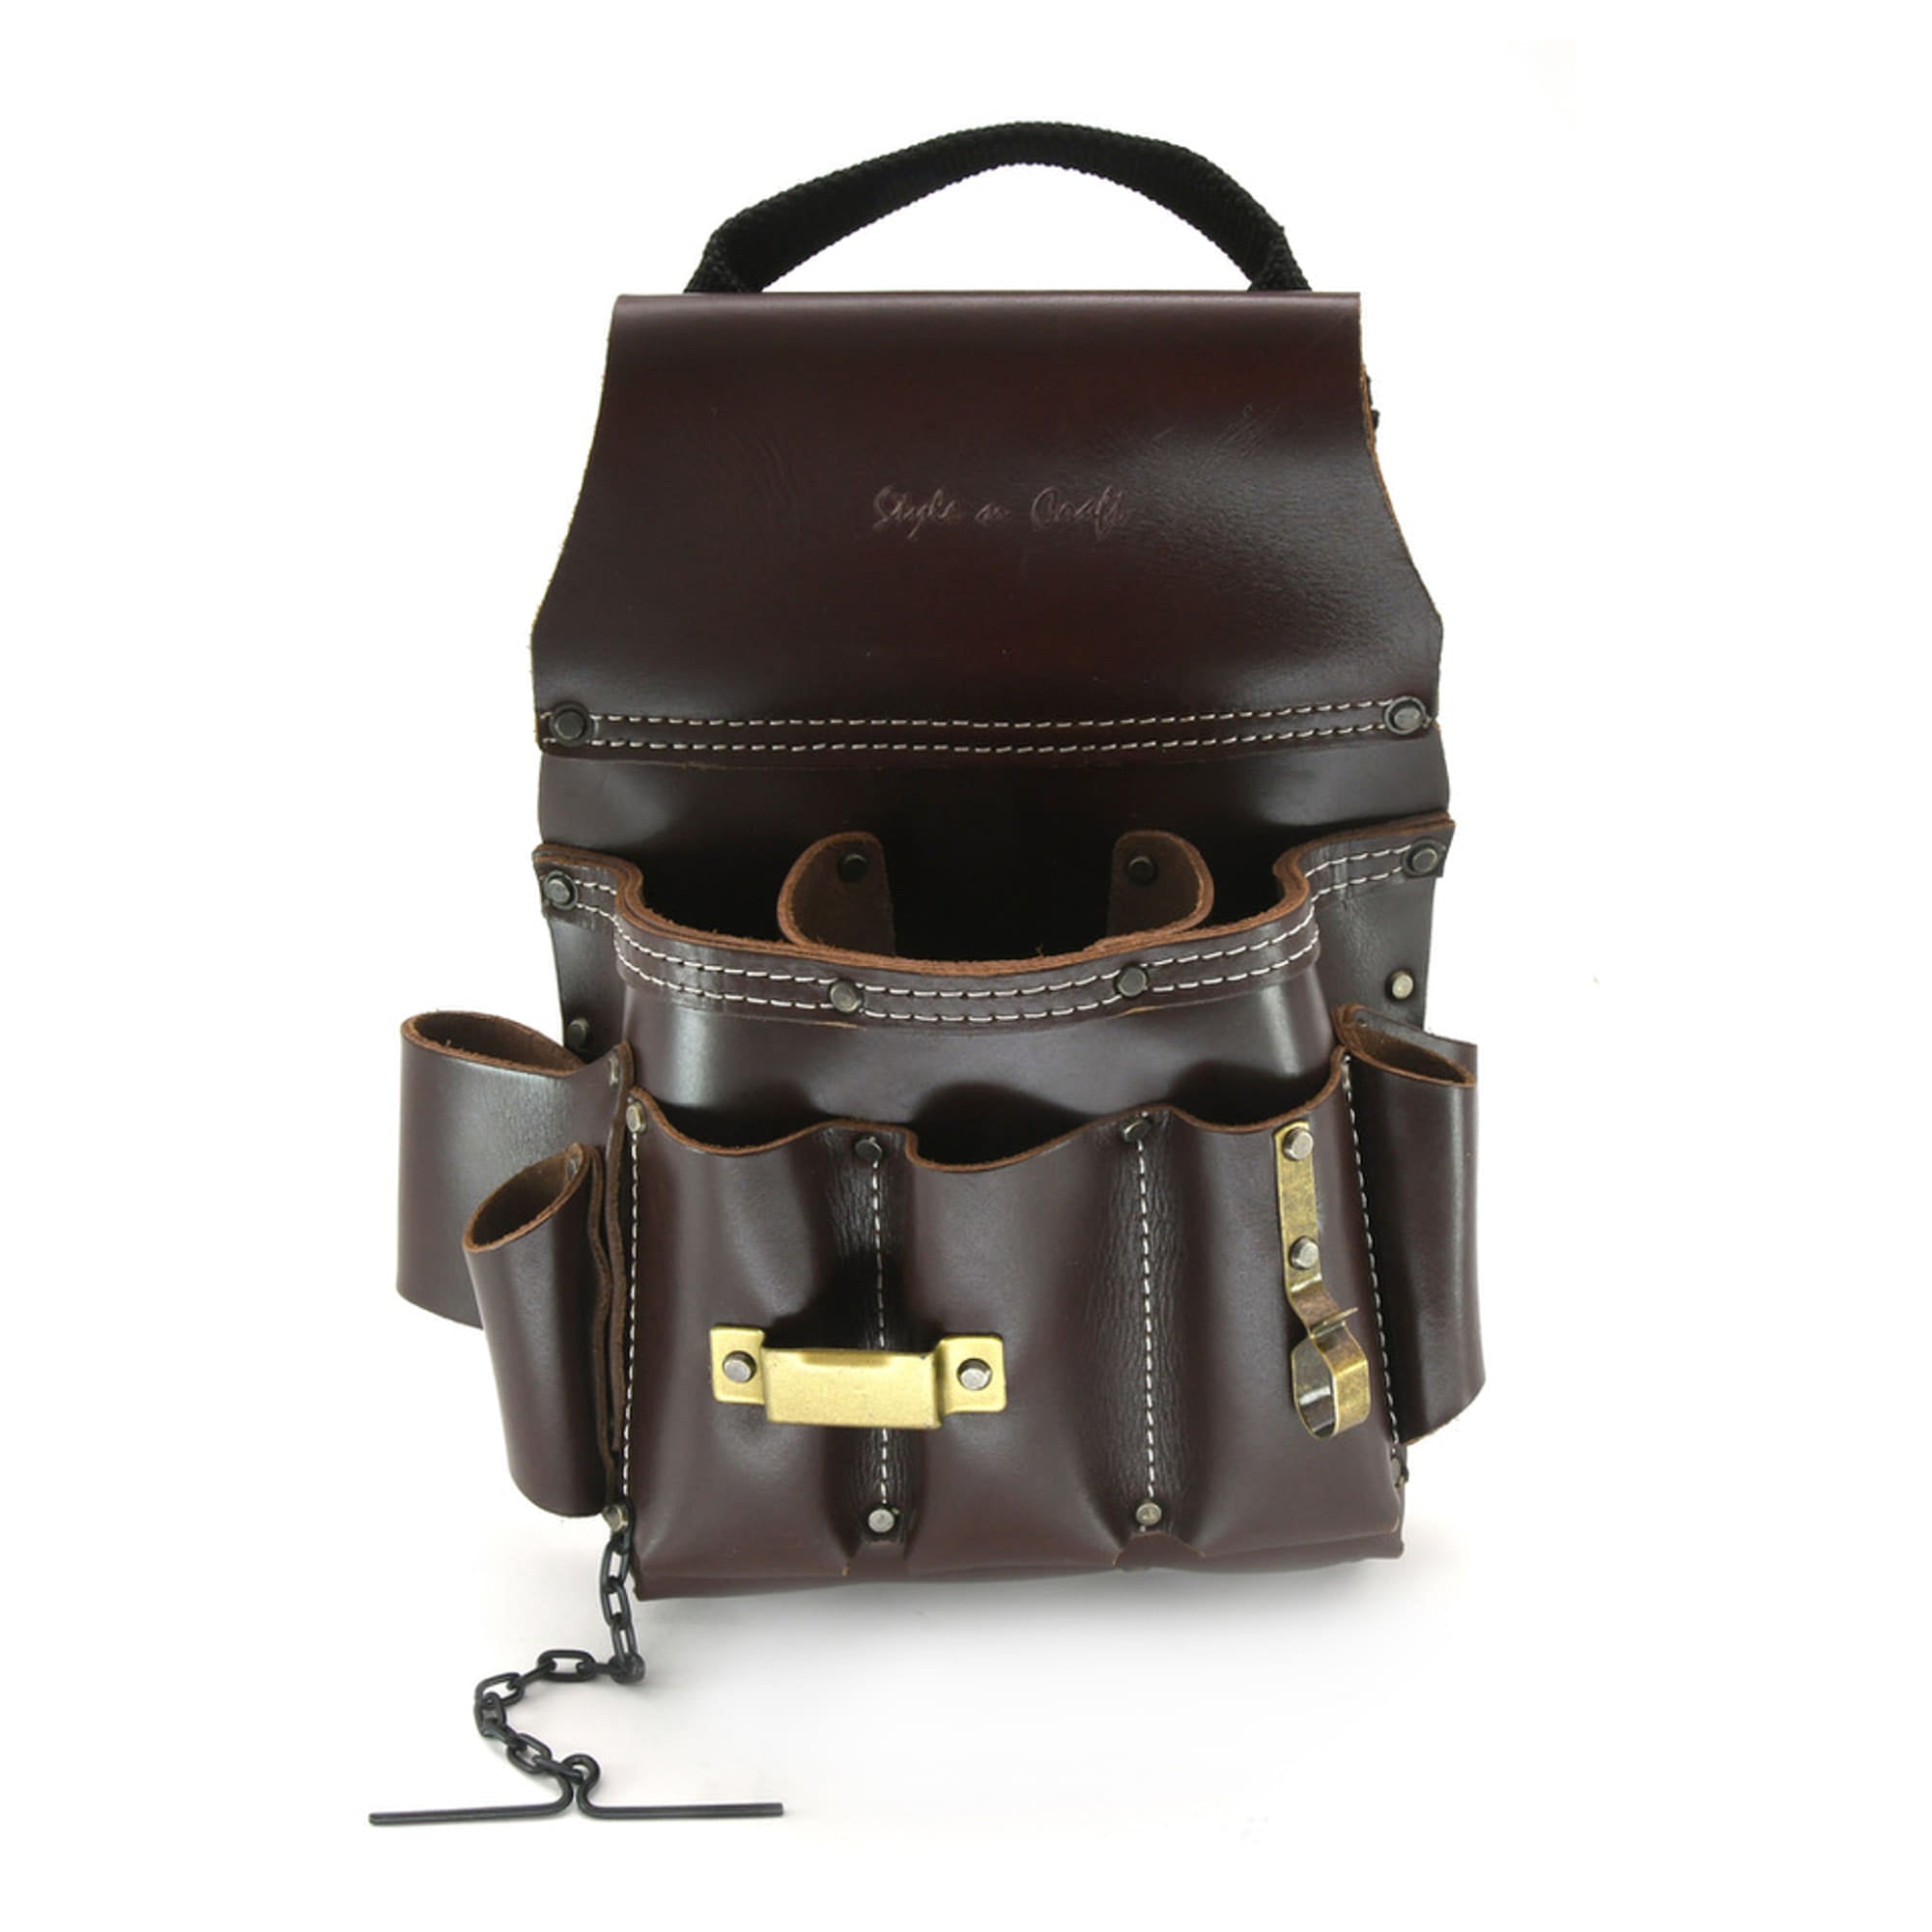 Women & Men's Leather Goods, Accessories and Tool Bags | Style n Craft